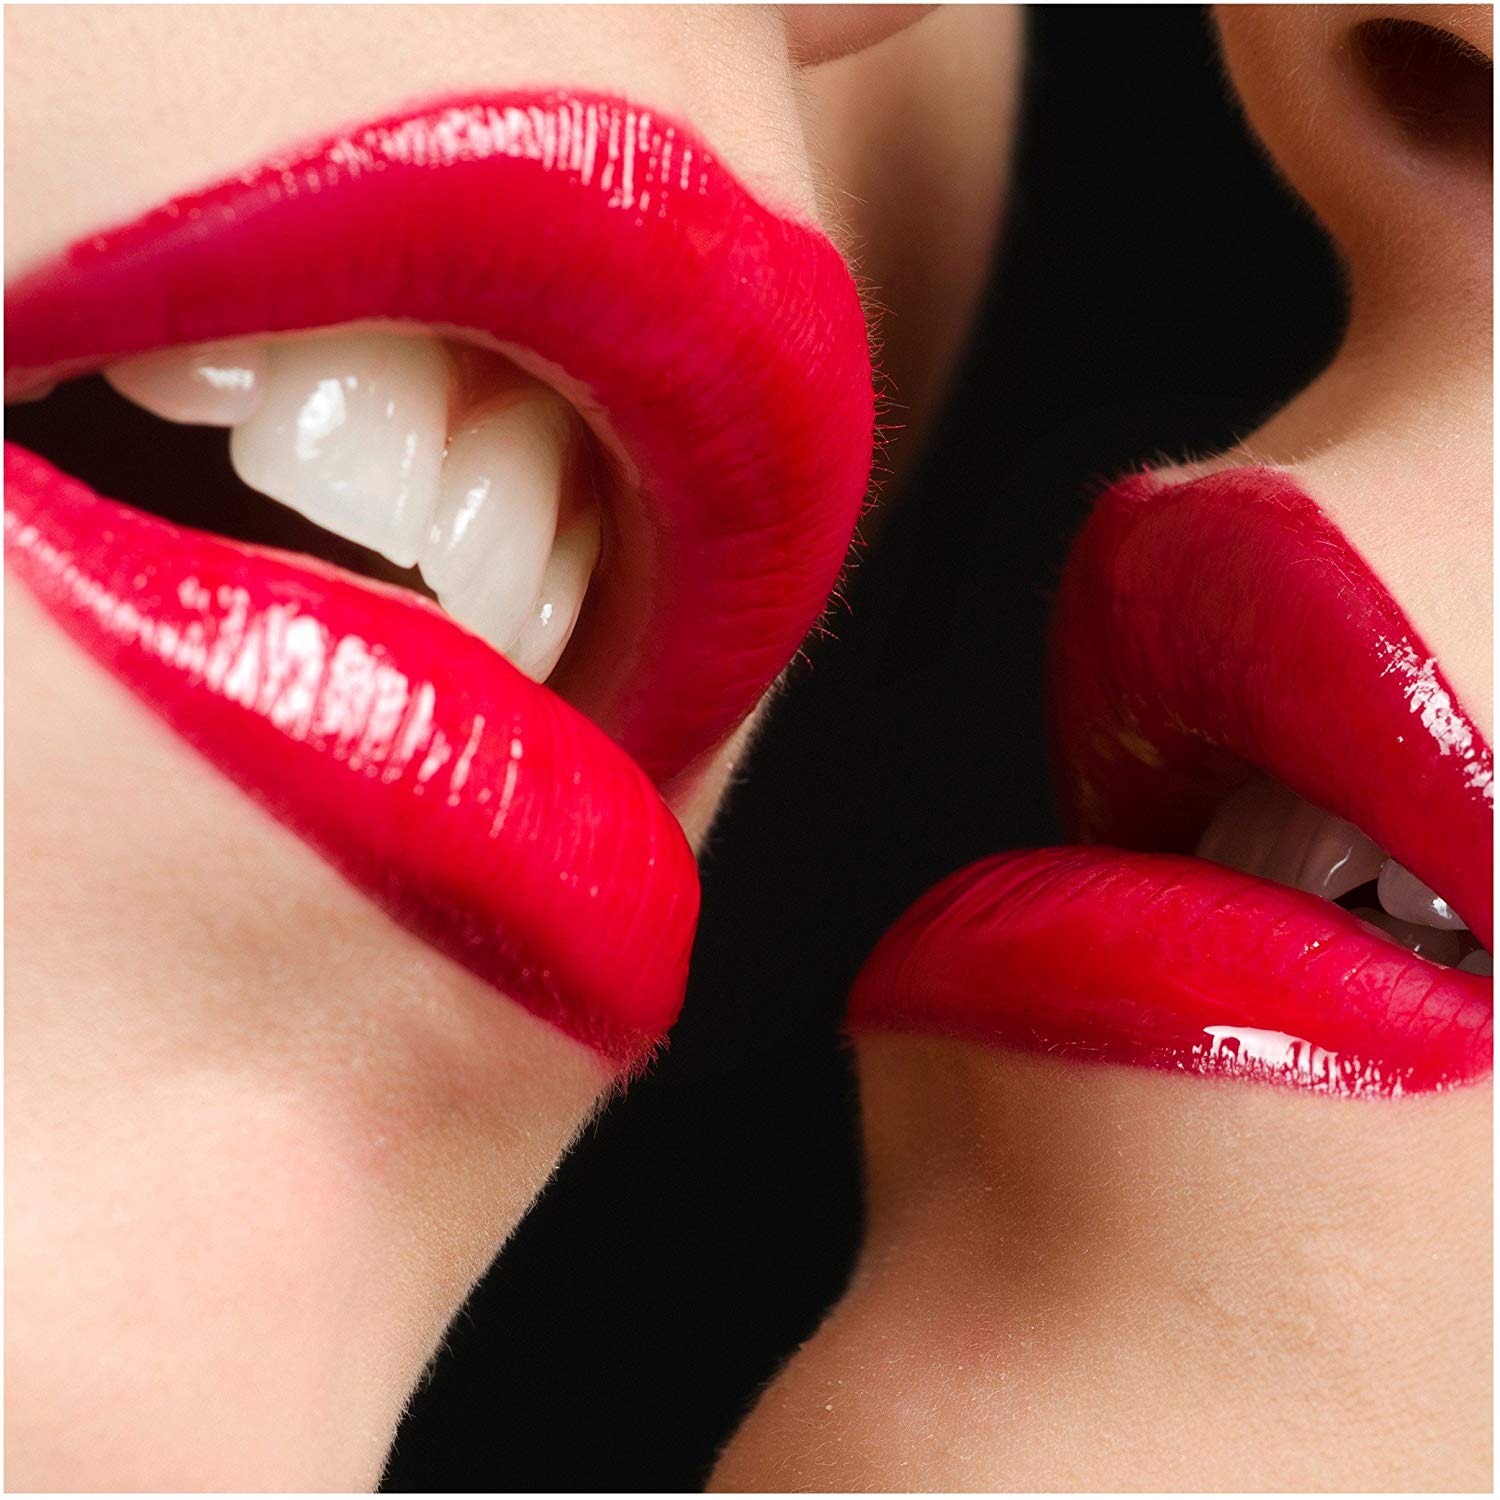 Non-woven Wallpaper Kiss Me Square, - Very Hot Red Lips - HD Wallpaper 